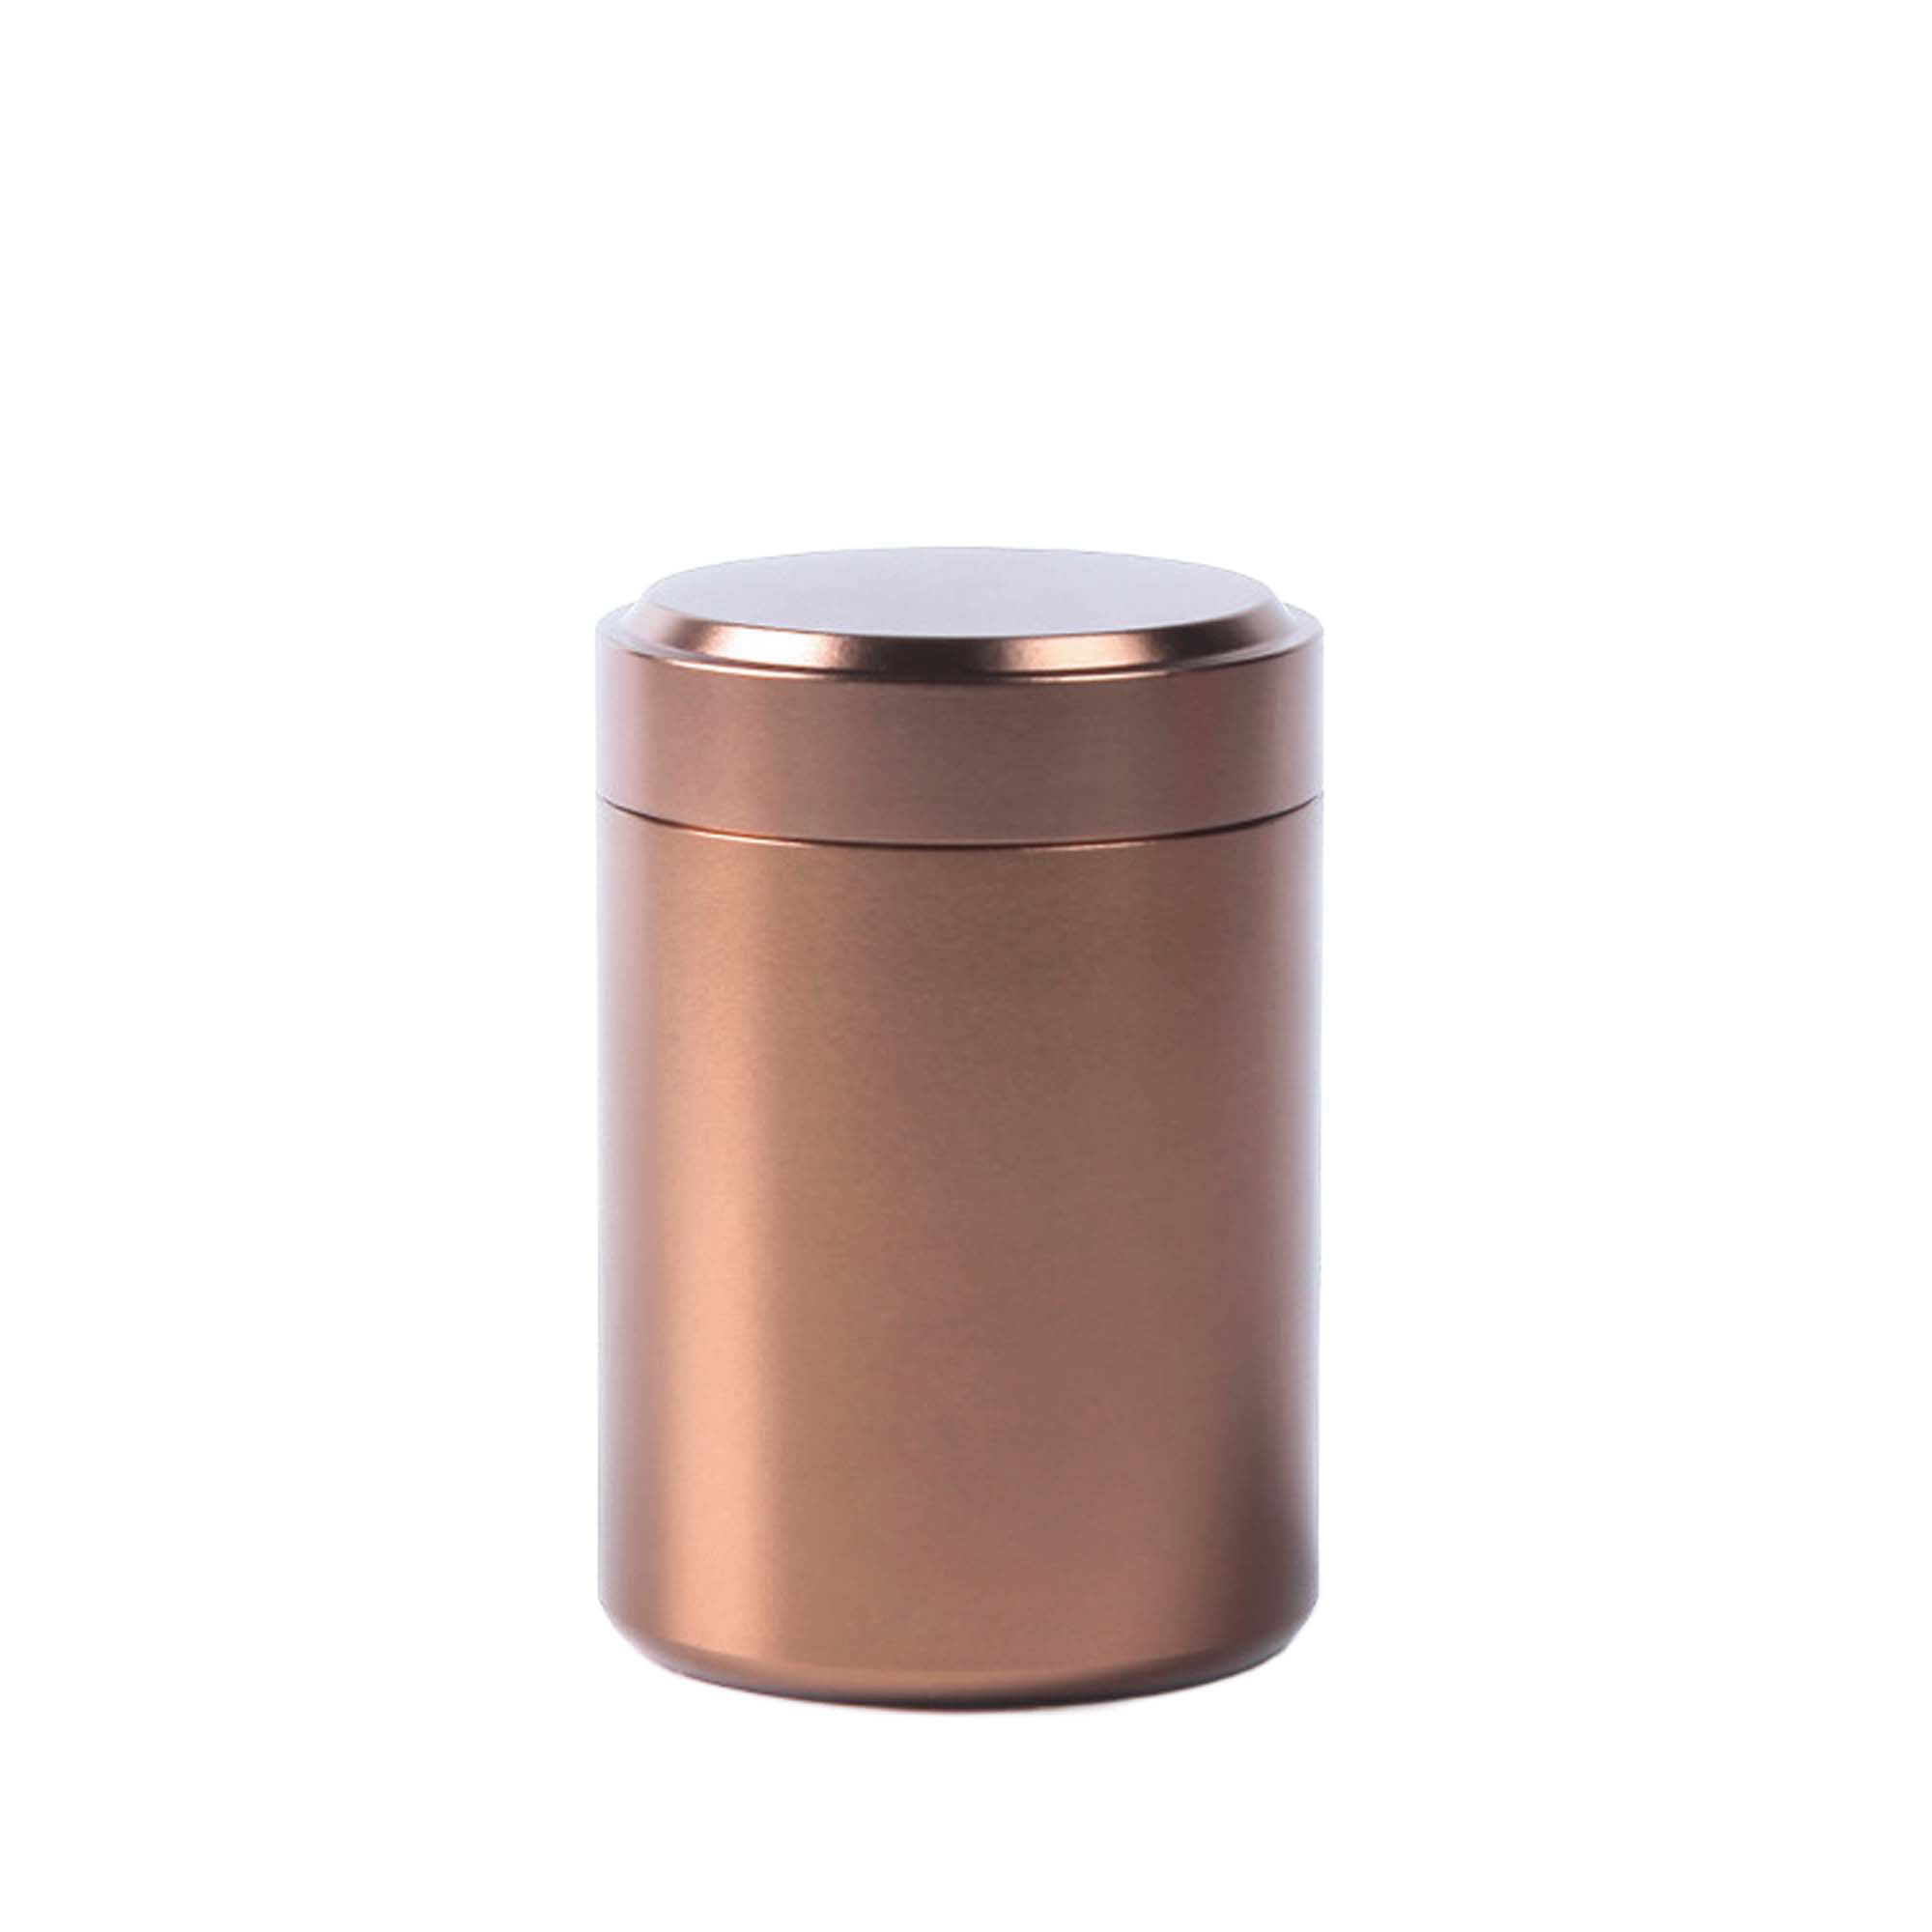 Waterproof Smell Proof Tea Box Herb Stash Jar Mini Metal Cans Sealed Container 